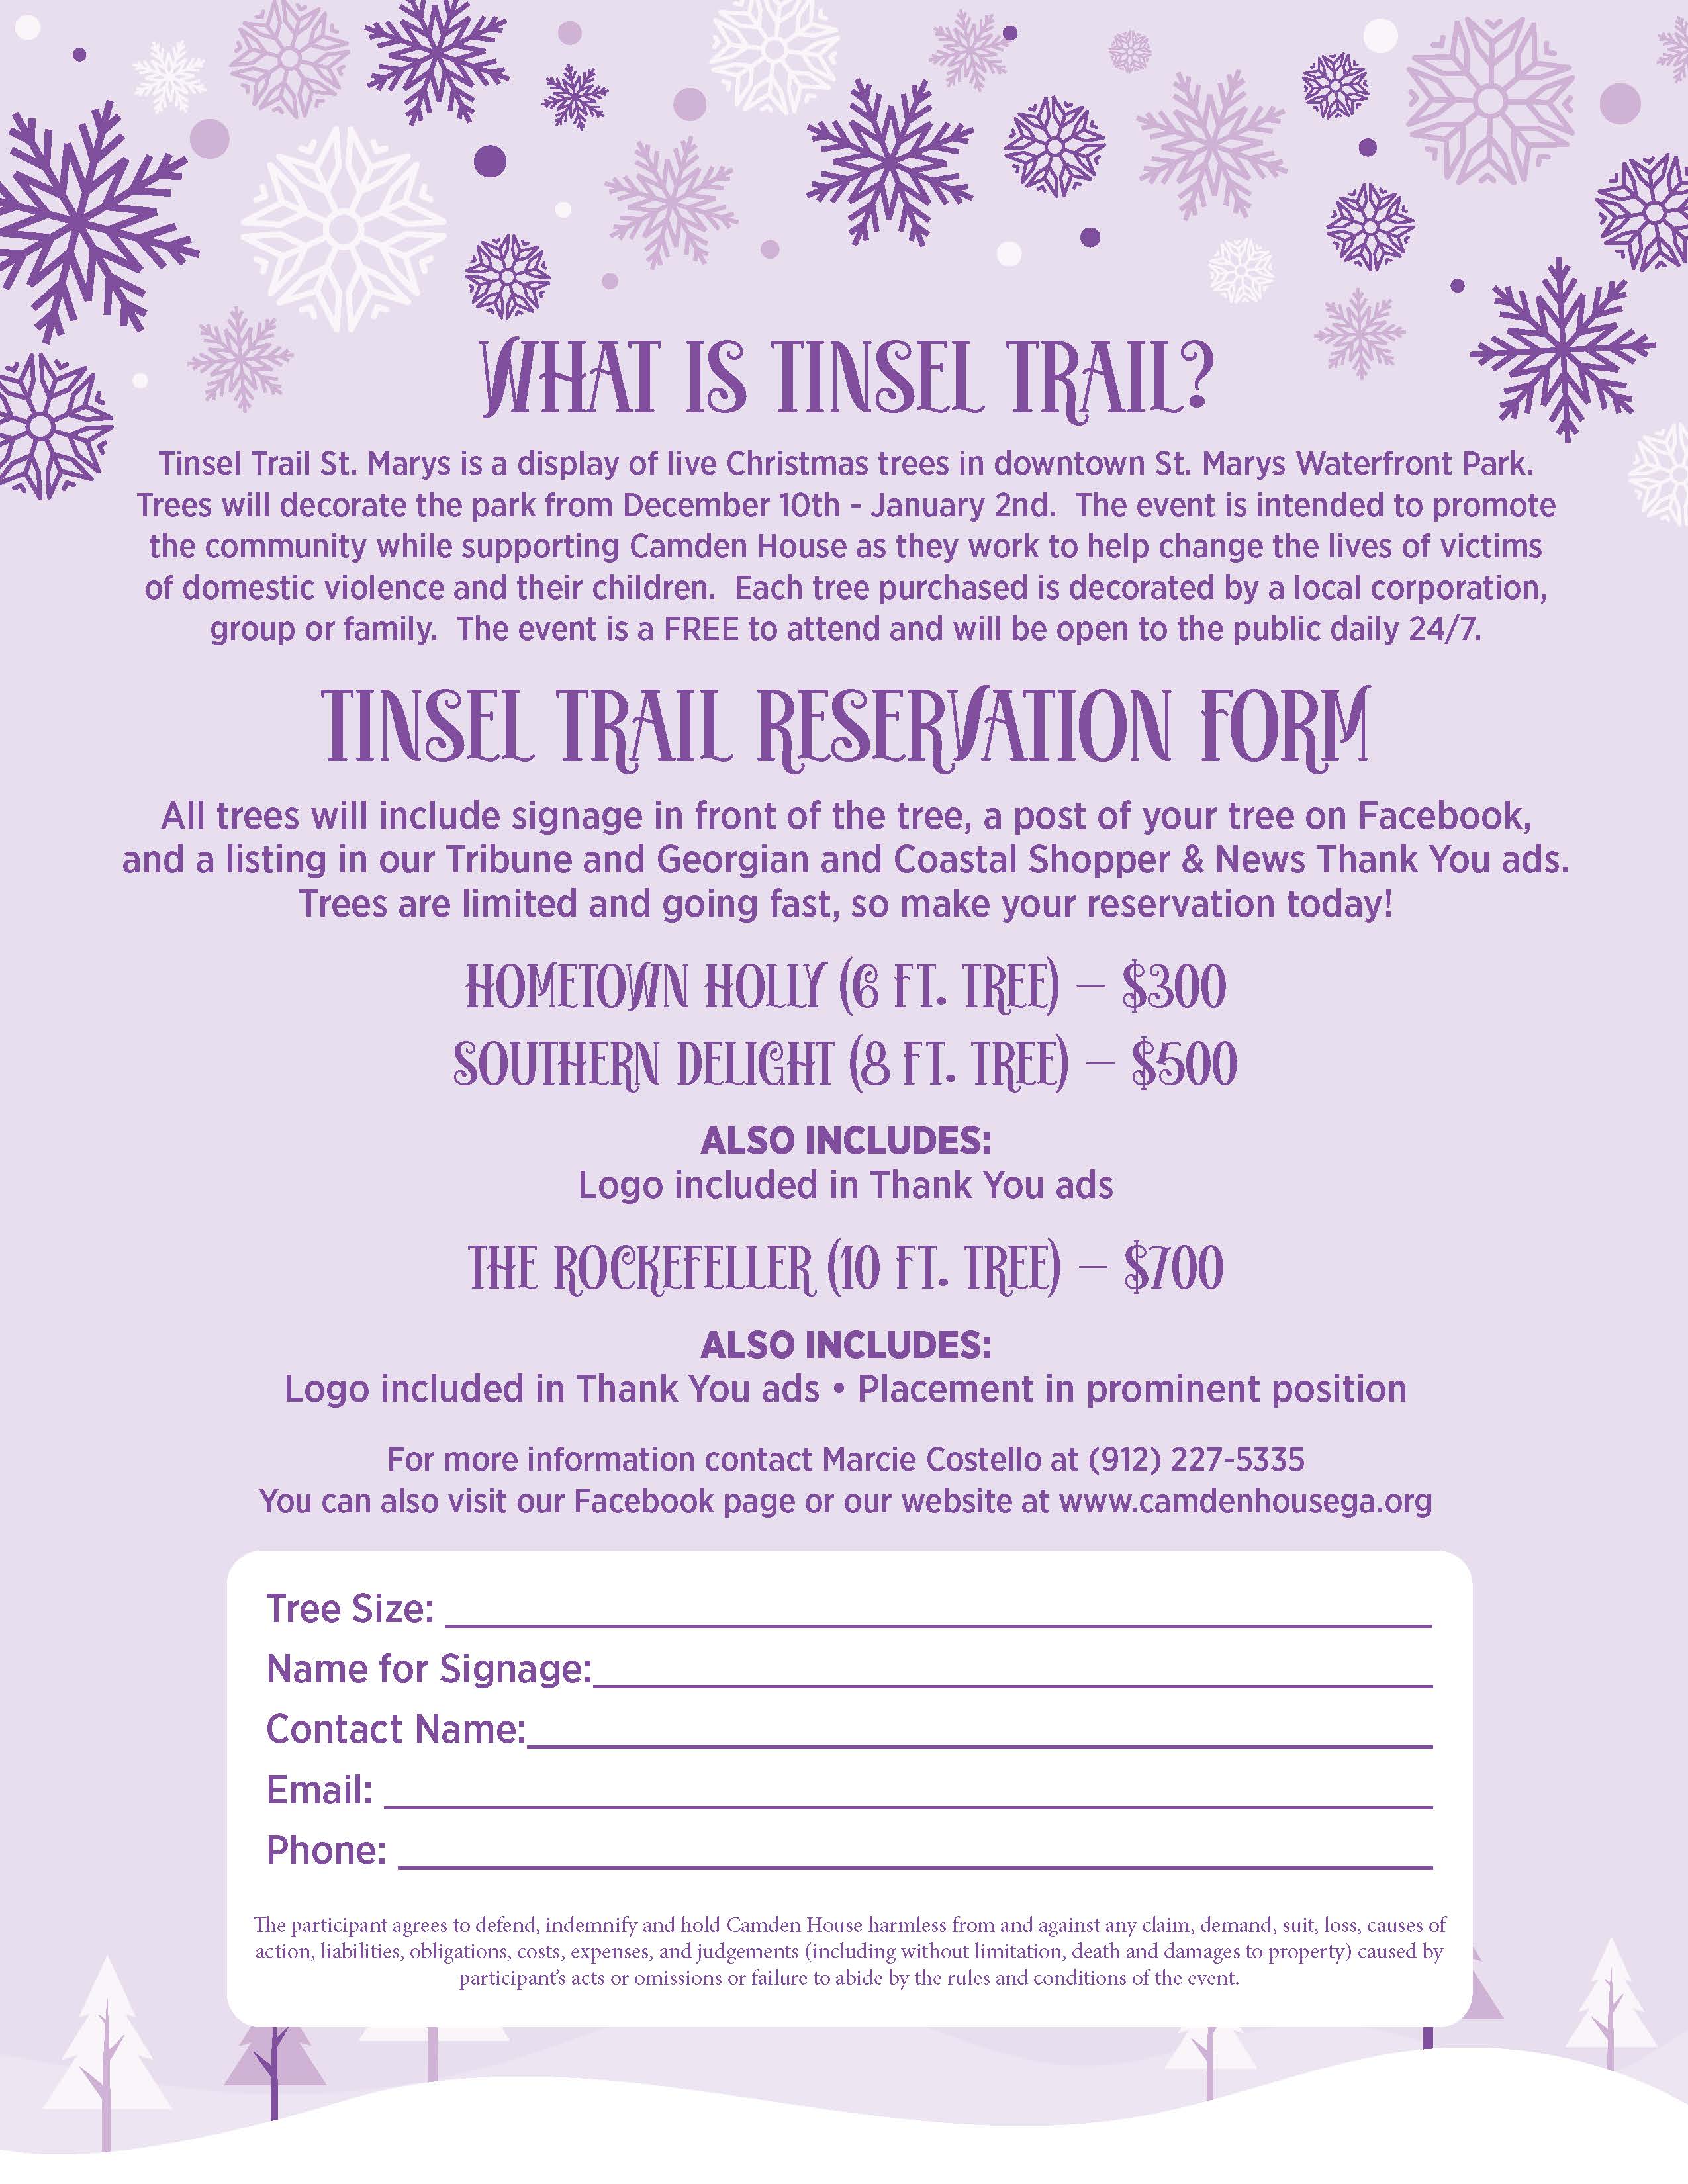 Tinsel Trail Reservation Form